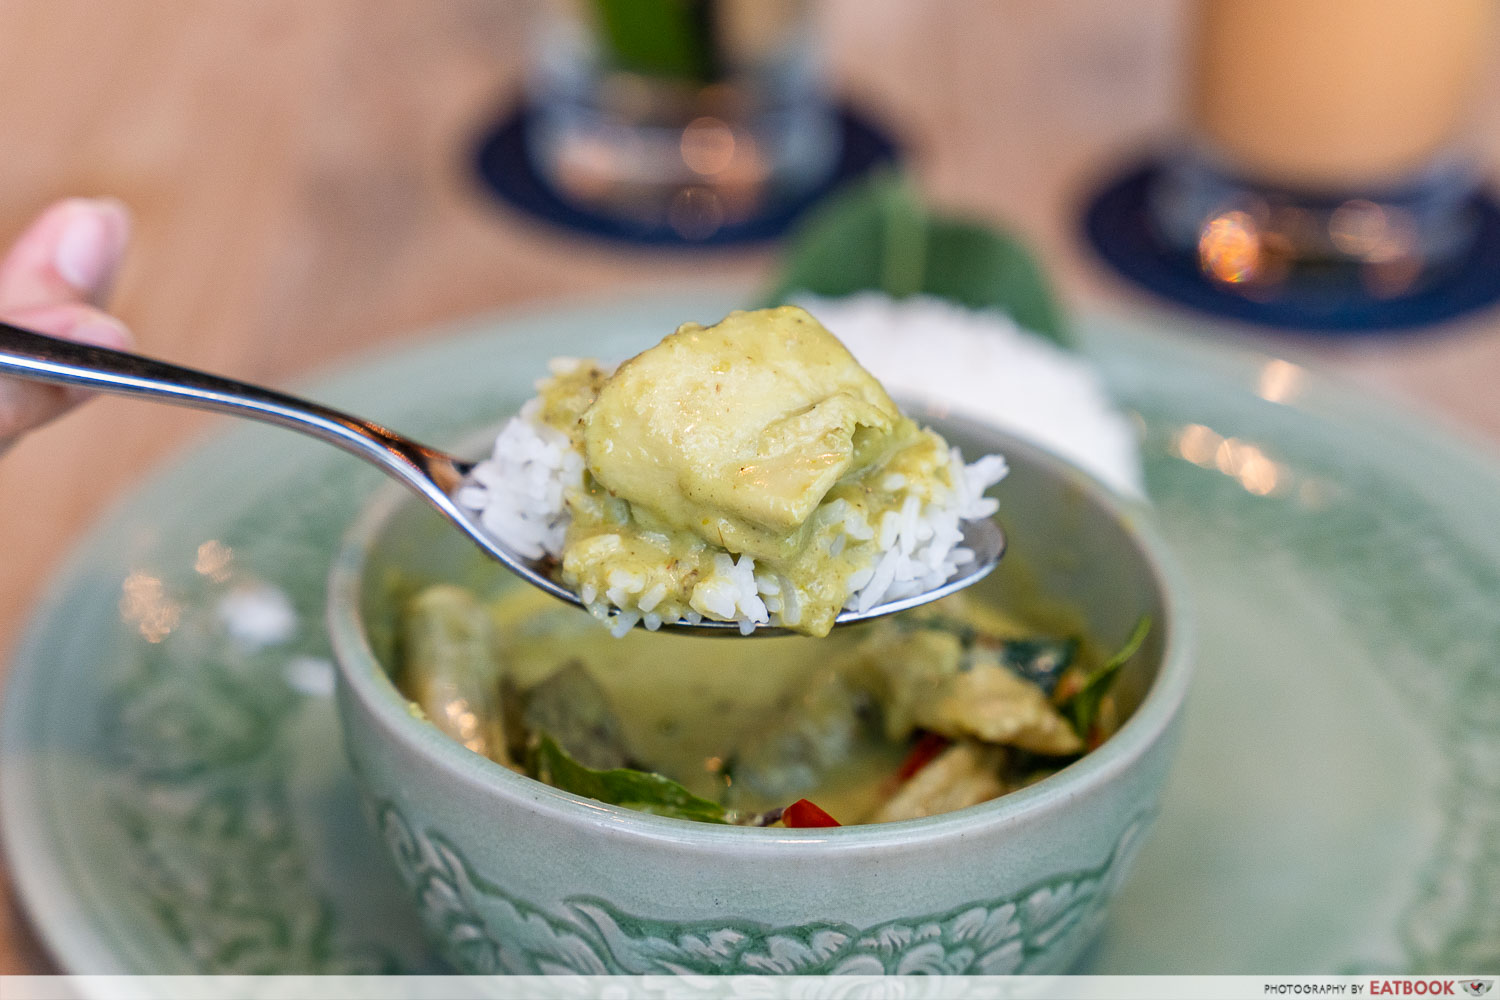 dusit thani greenhouse - green curry